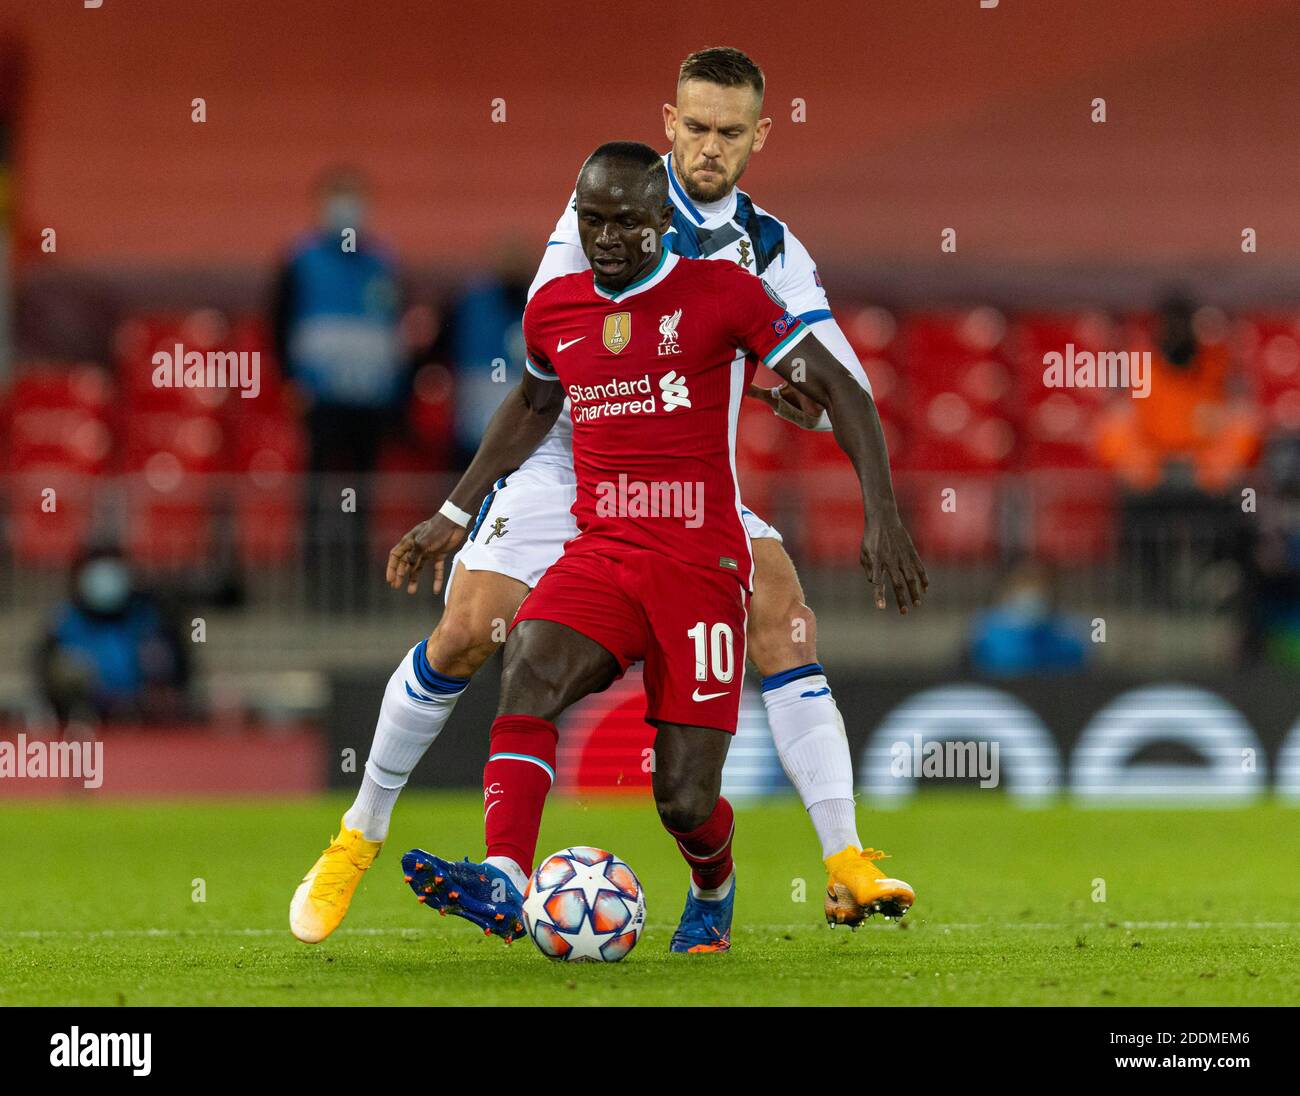 Liverpool. 26th Nov, 2020. Liverpool's Sadio Mane controls the ball during the UEFA Champions League Group D match between Liverpool FC and Atalanta BC at Anfield in Liverpool, Britain, on Nov. 25, 2020. Credit: Xinhua/Alamy Live News Stock Photo